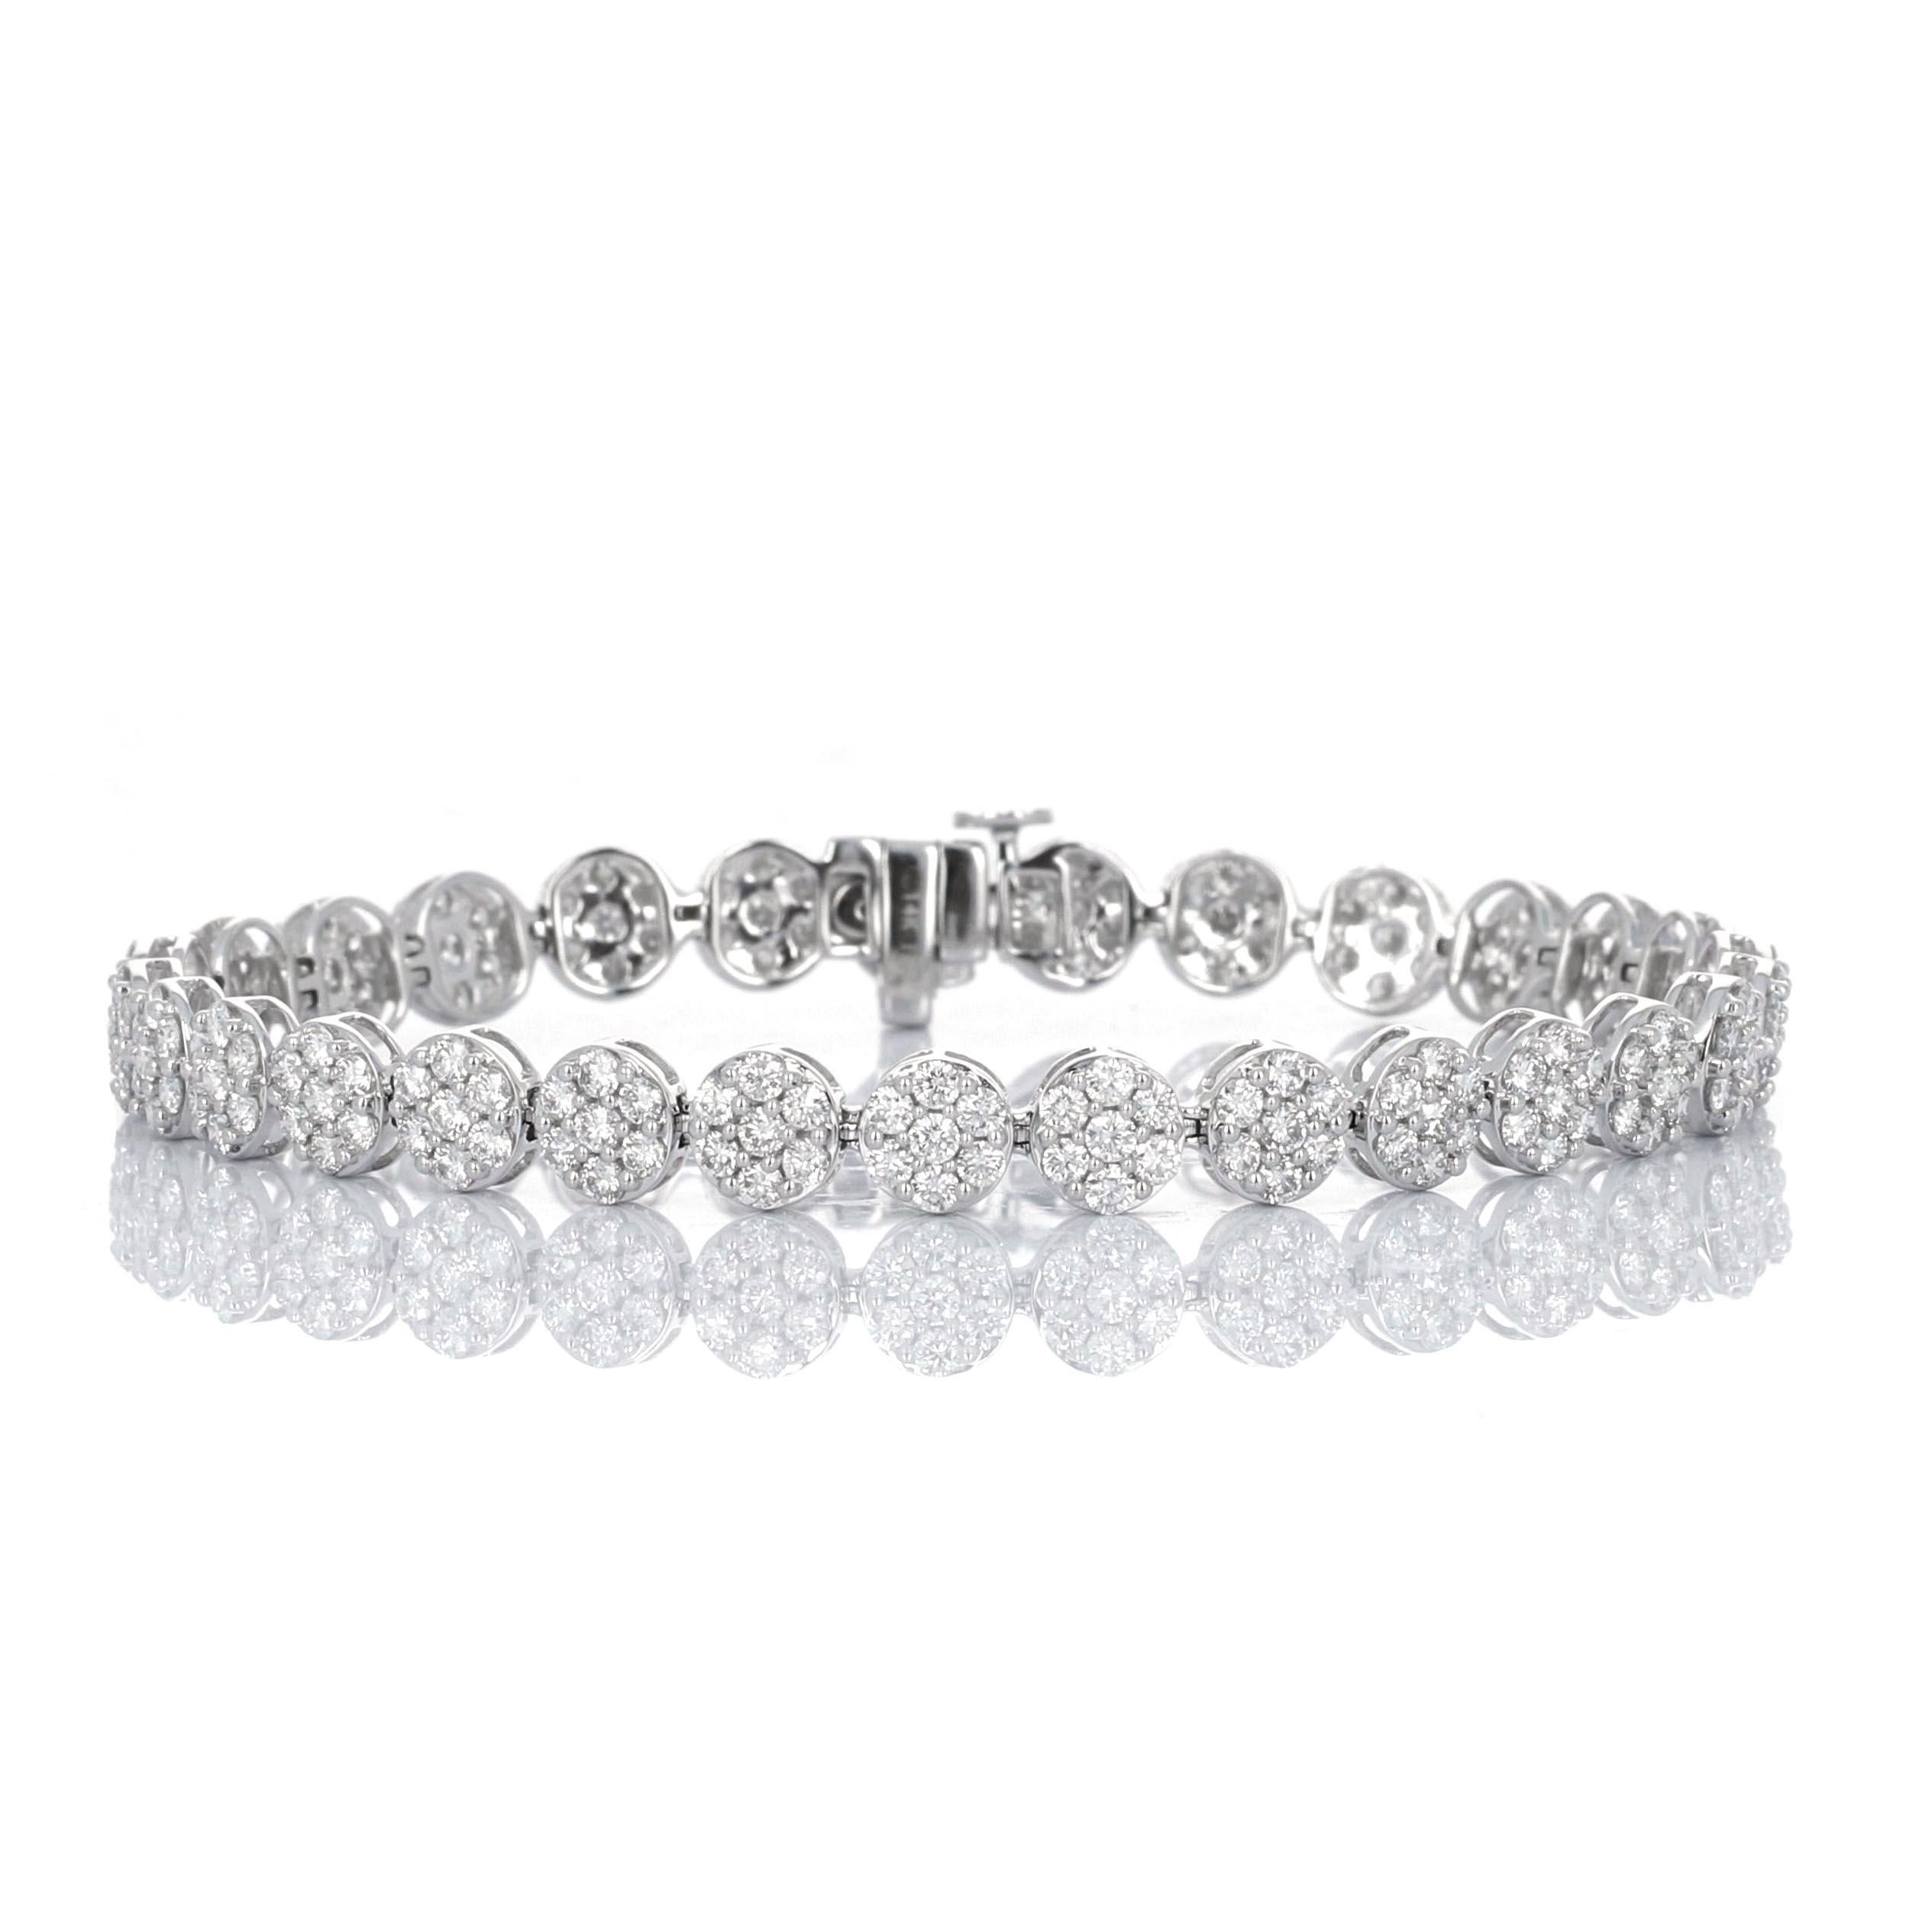 14 karat white gold diamond tennis bracelet. The diamonds are set to create an iillusion. Each link is composed of smaller diamonds, making it look like one large stone. There is an estimated 5.00 carats total weight in diamonds.
